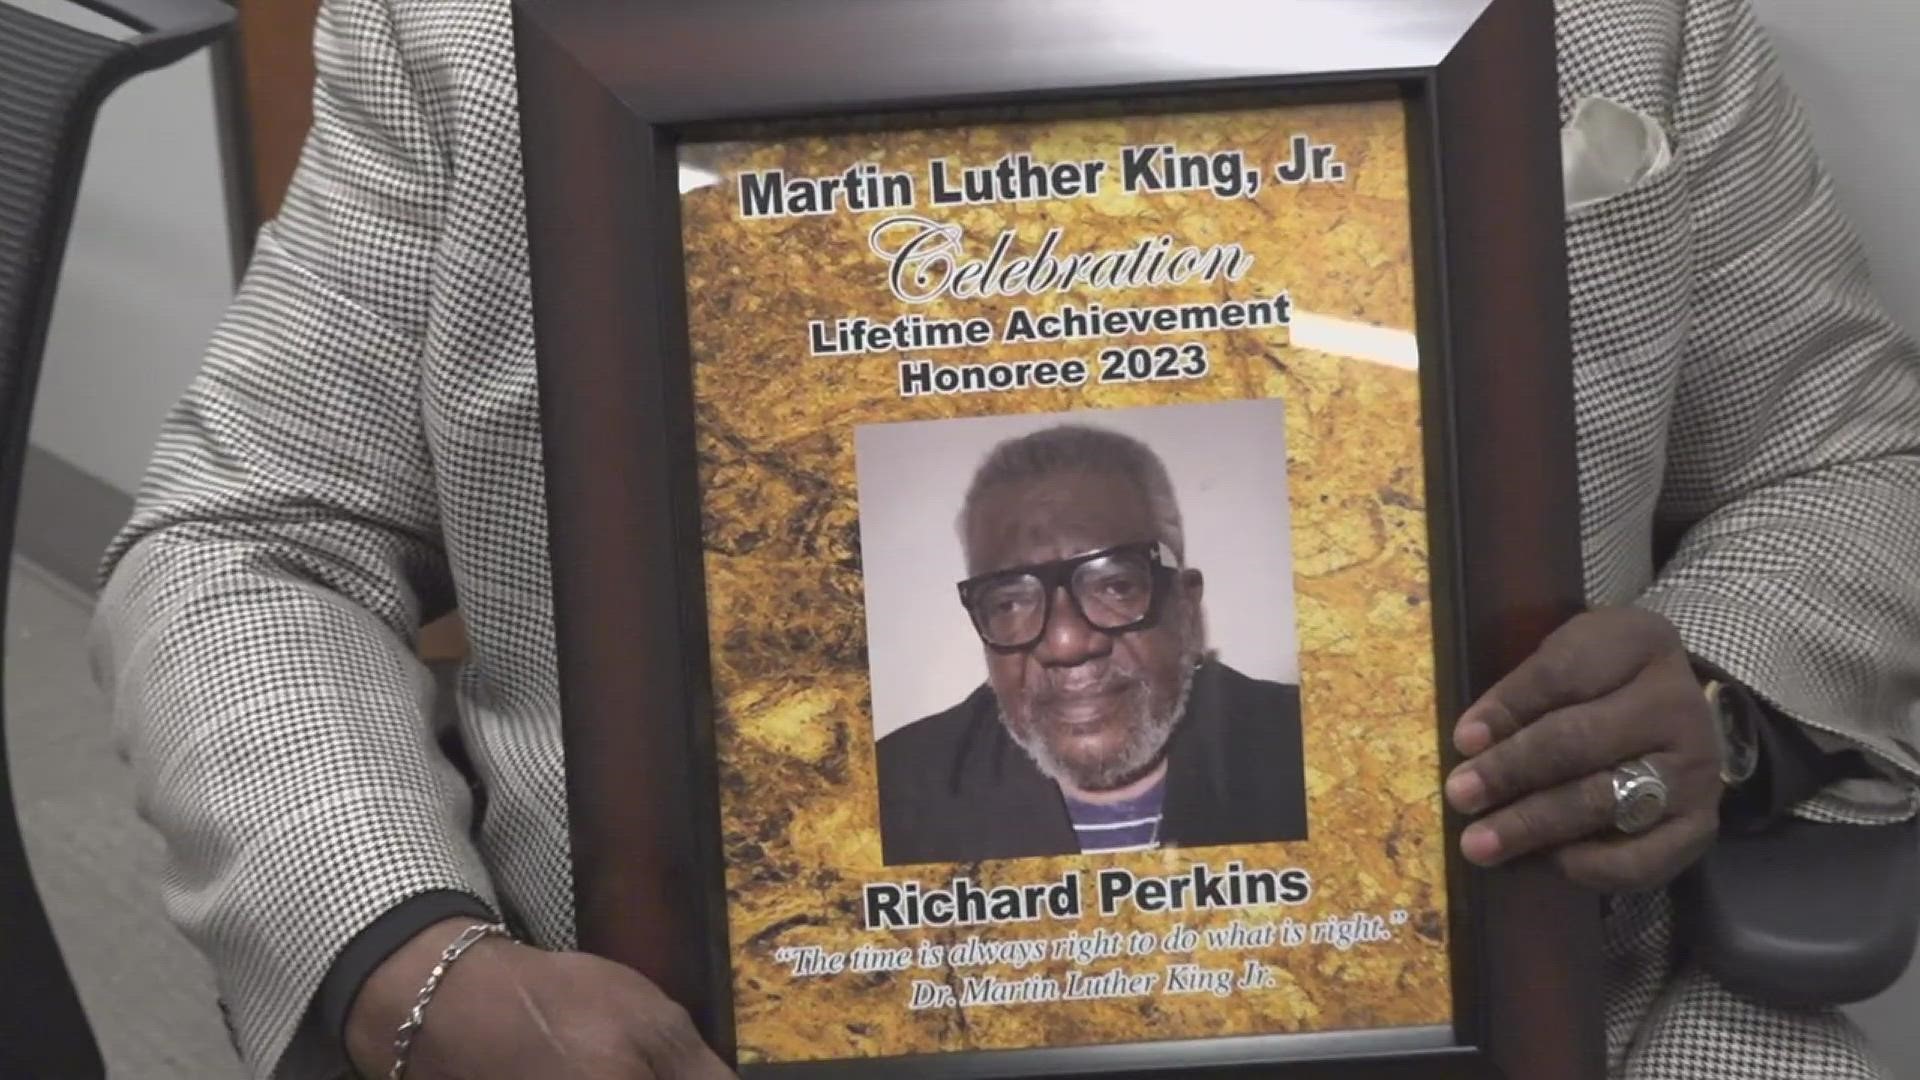 Singing for Dr. Martin Luther King Jr. was just the start of Richard Perkins' long and prosperous career.